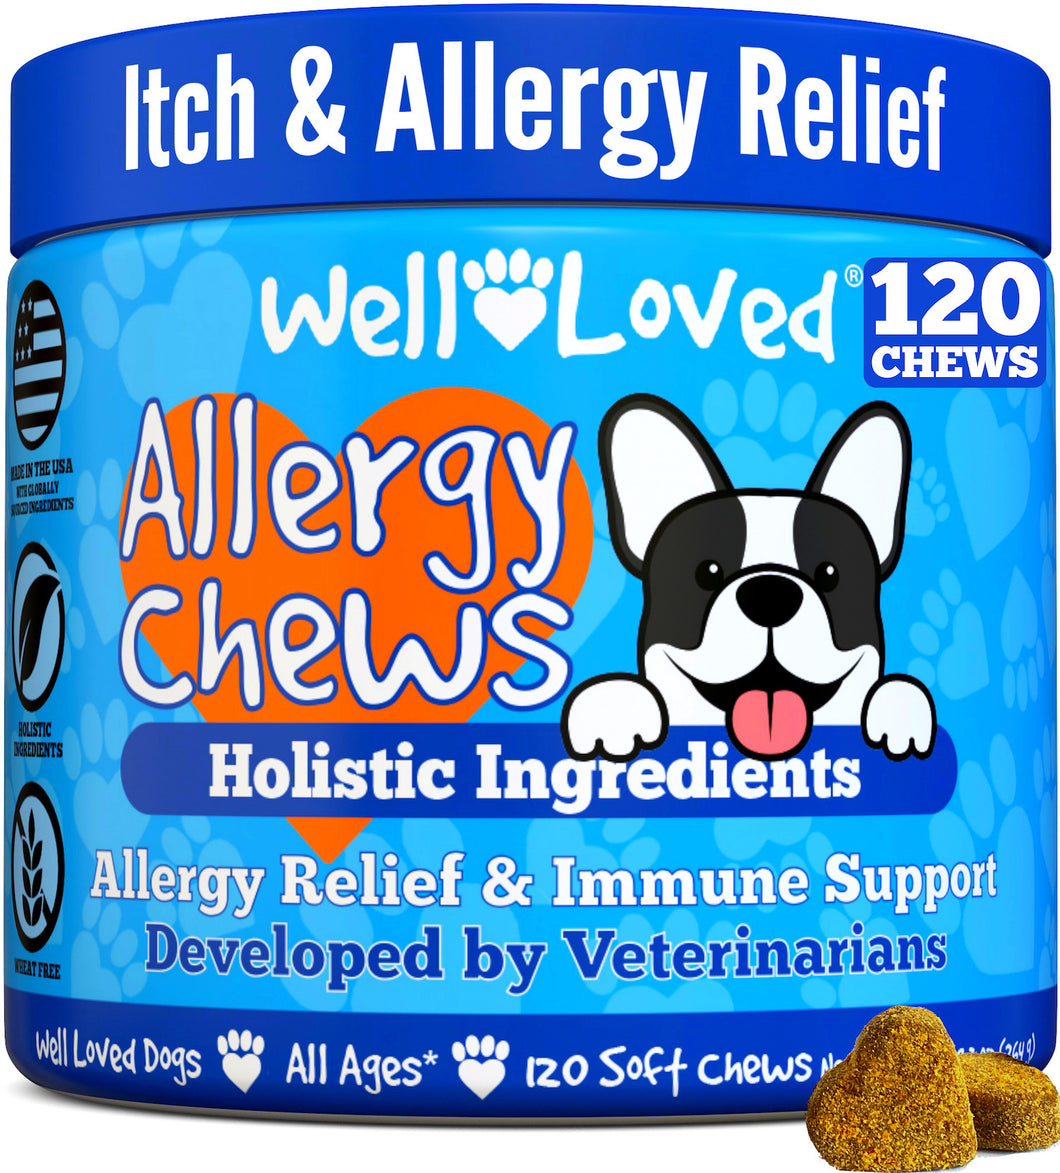 Well Loved Allergy Chews